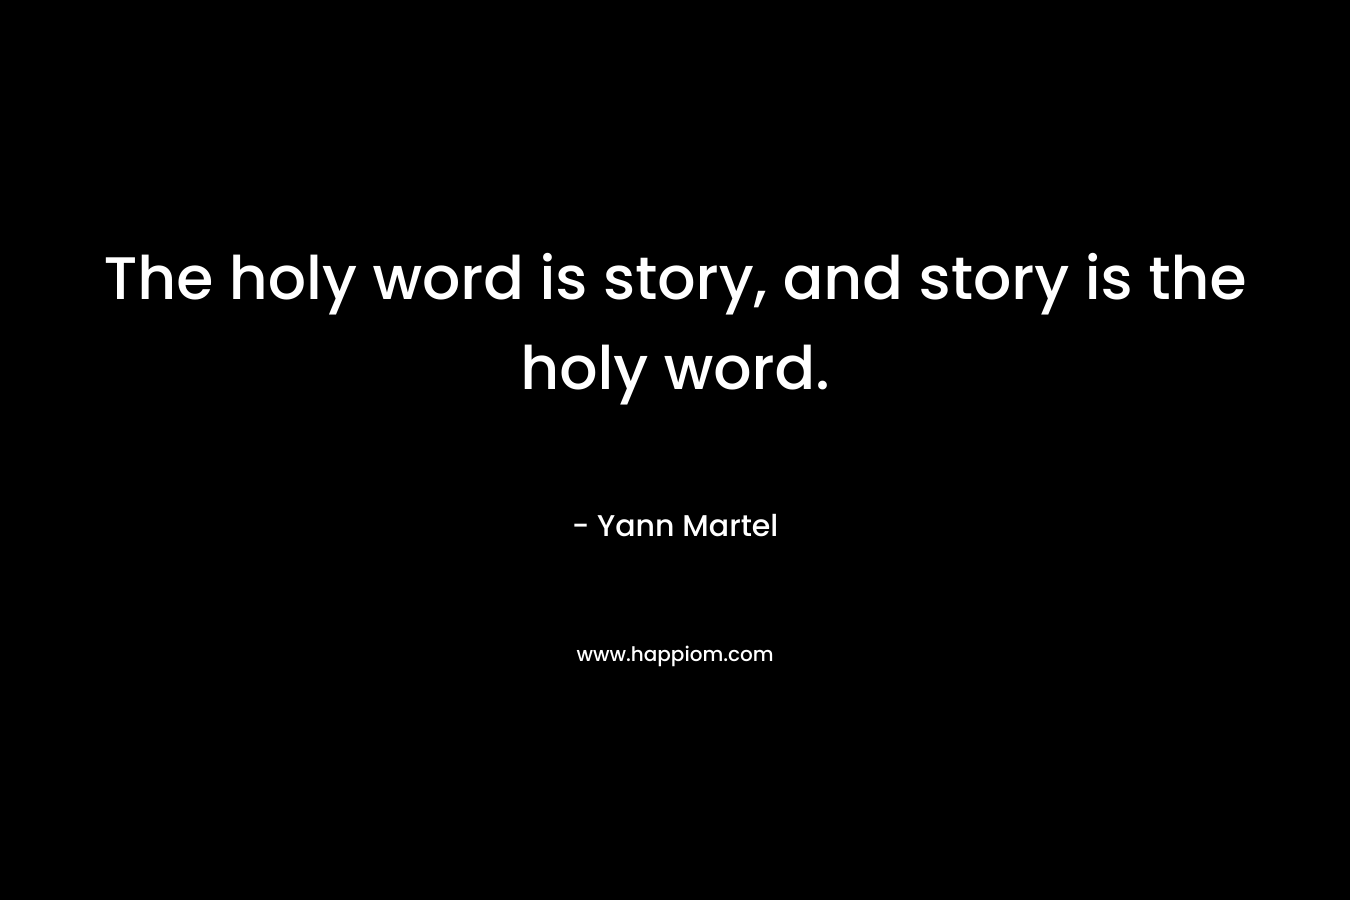 The holy word is story, and story is the holy word.